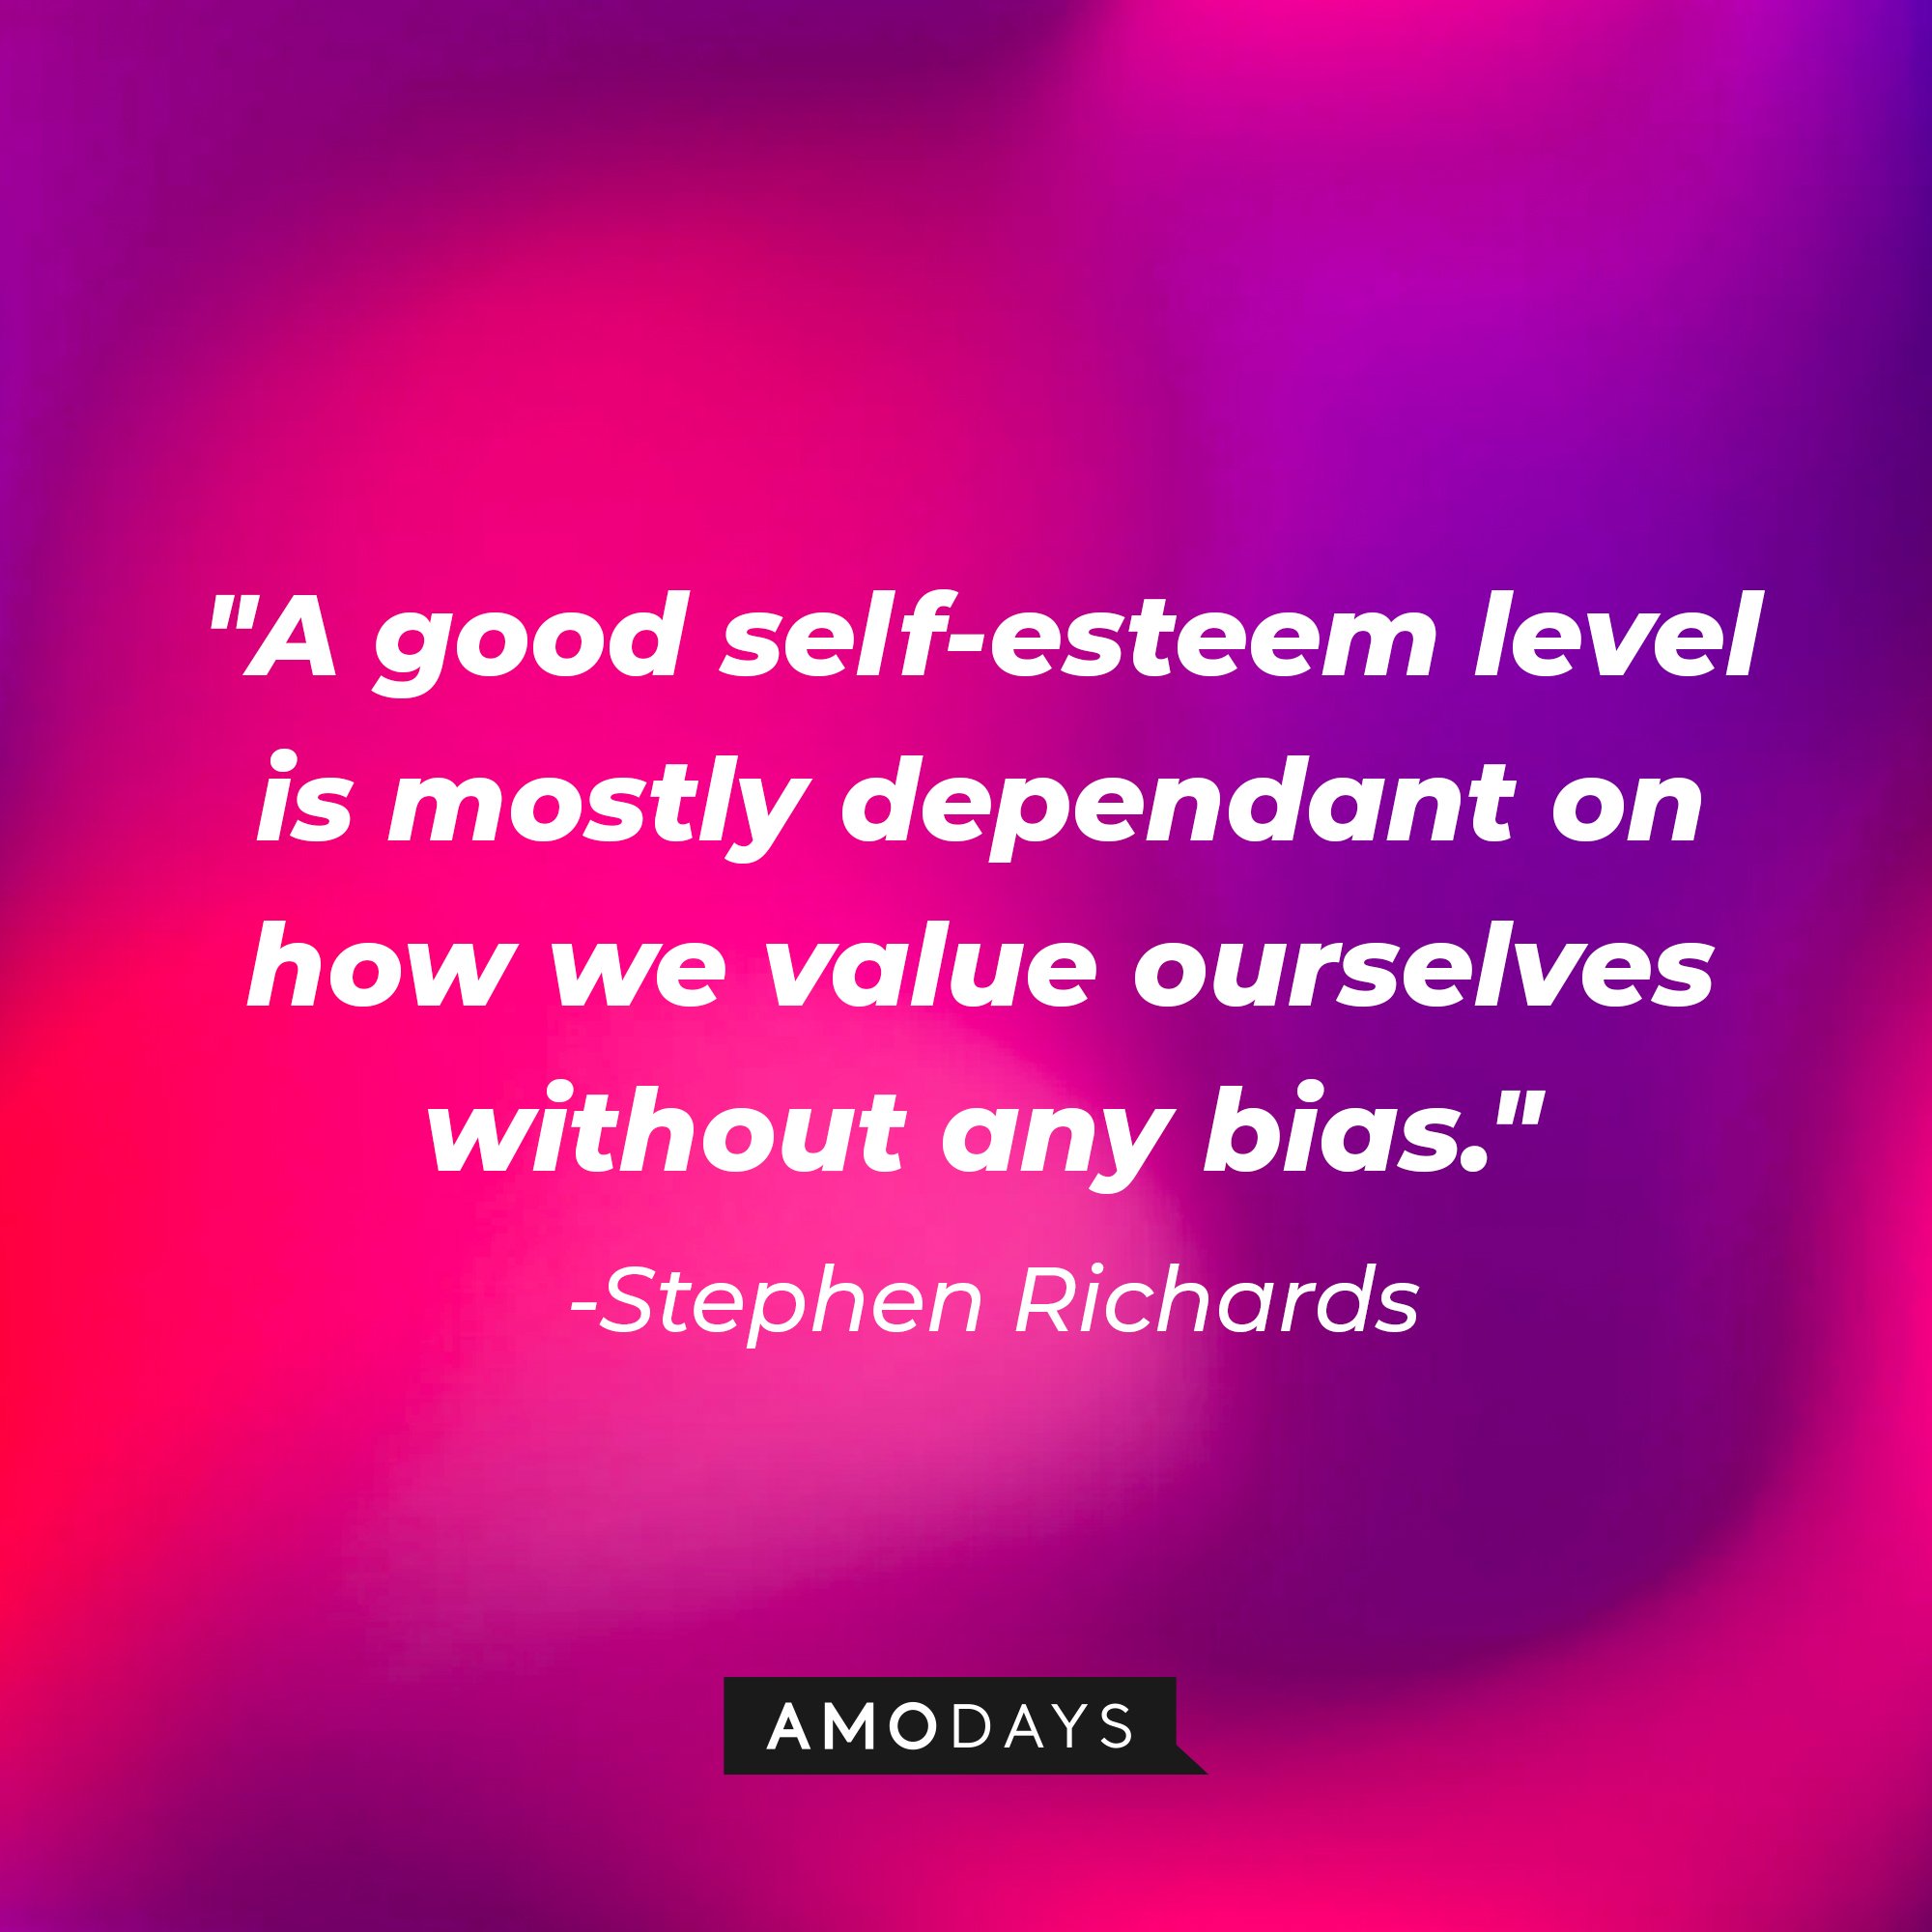 Stephen Richards' quote: "A good self-esteem level is mostly dependant on how we value ourselves without any bias." | Image: AmoDays